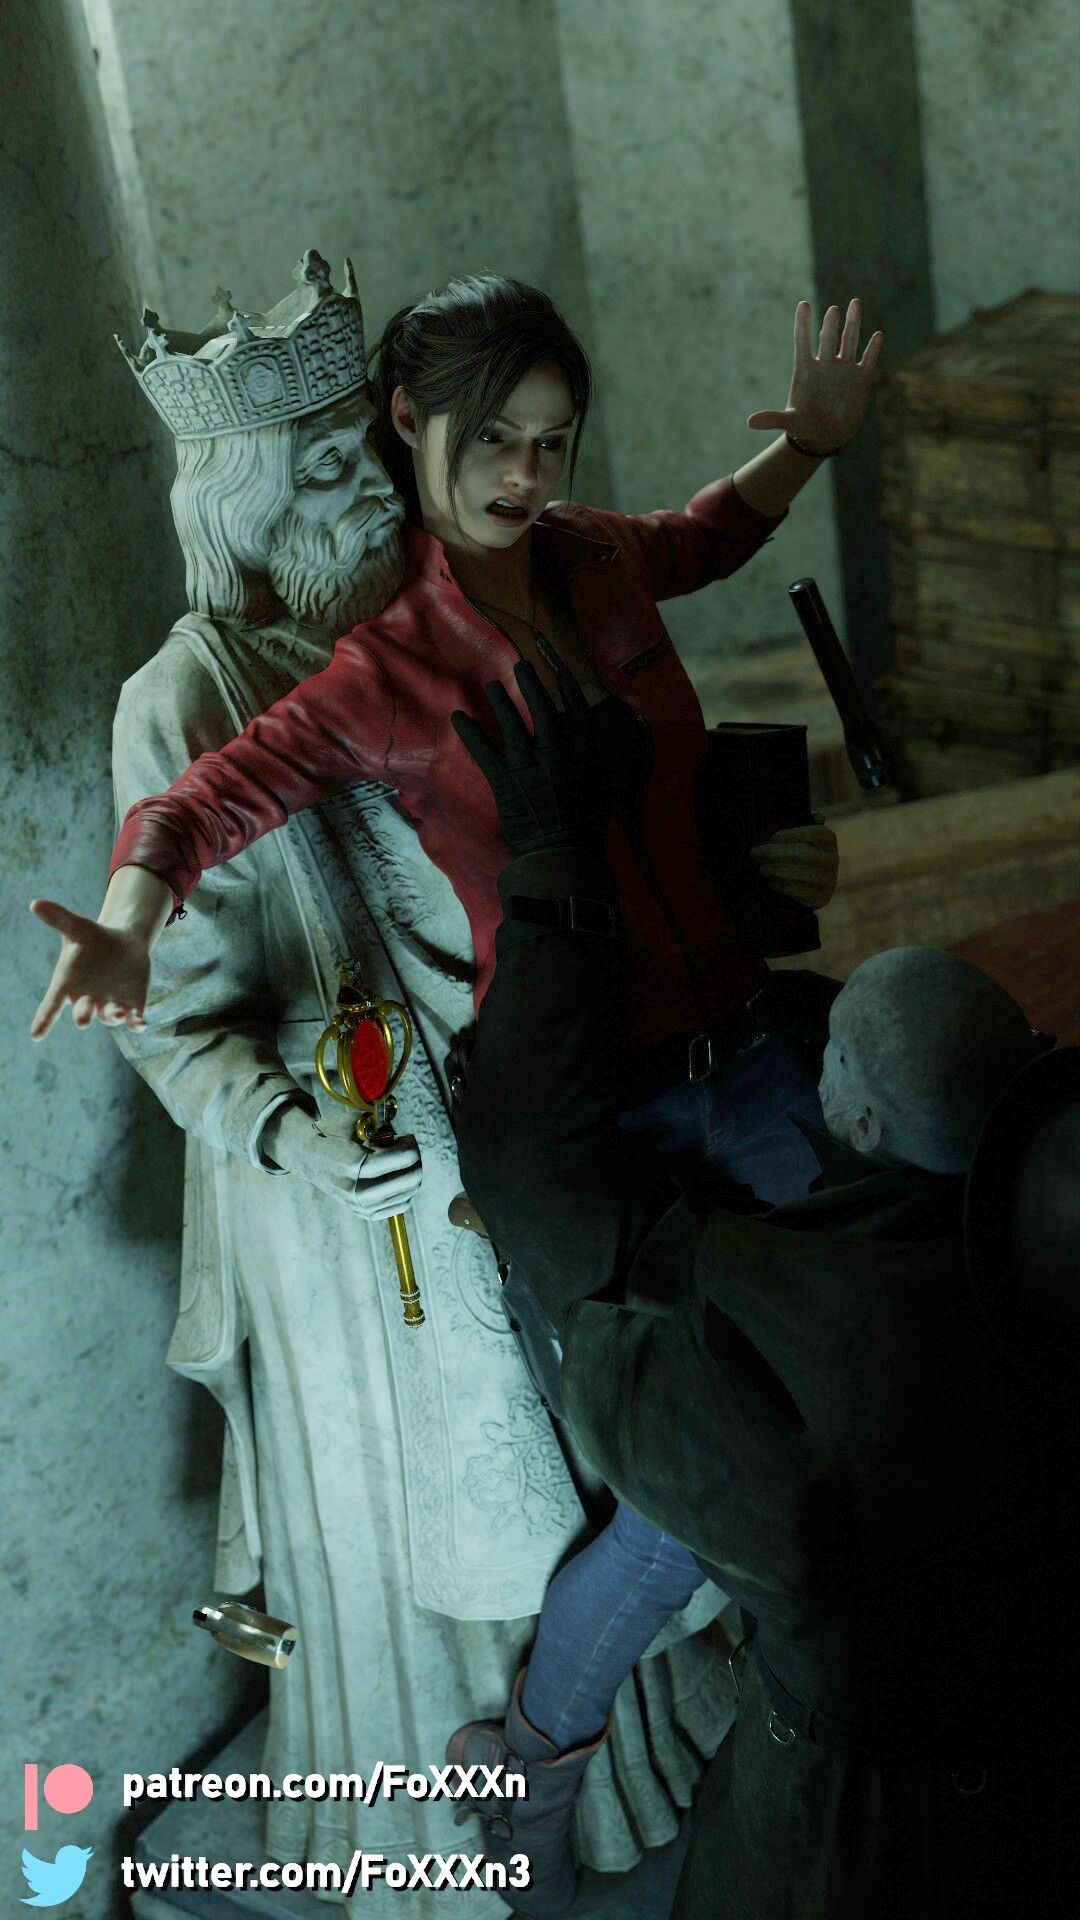 [FoXXXn] Claire Redfield and Mr.X (Resident Evil) 2